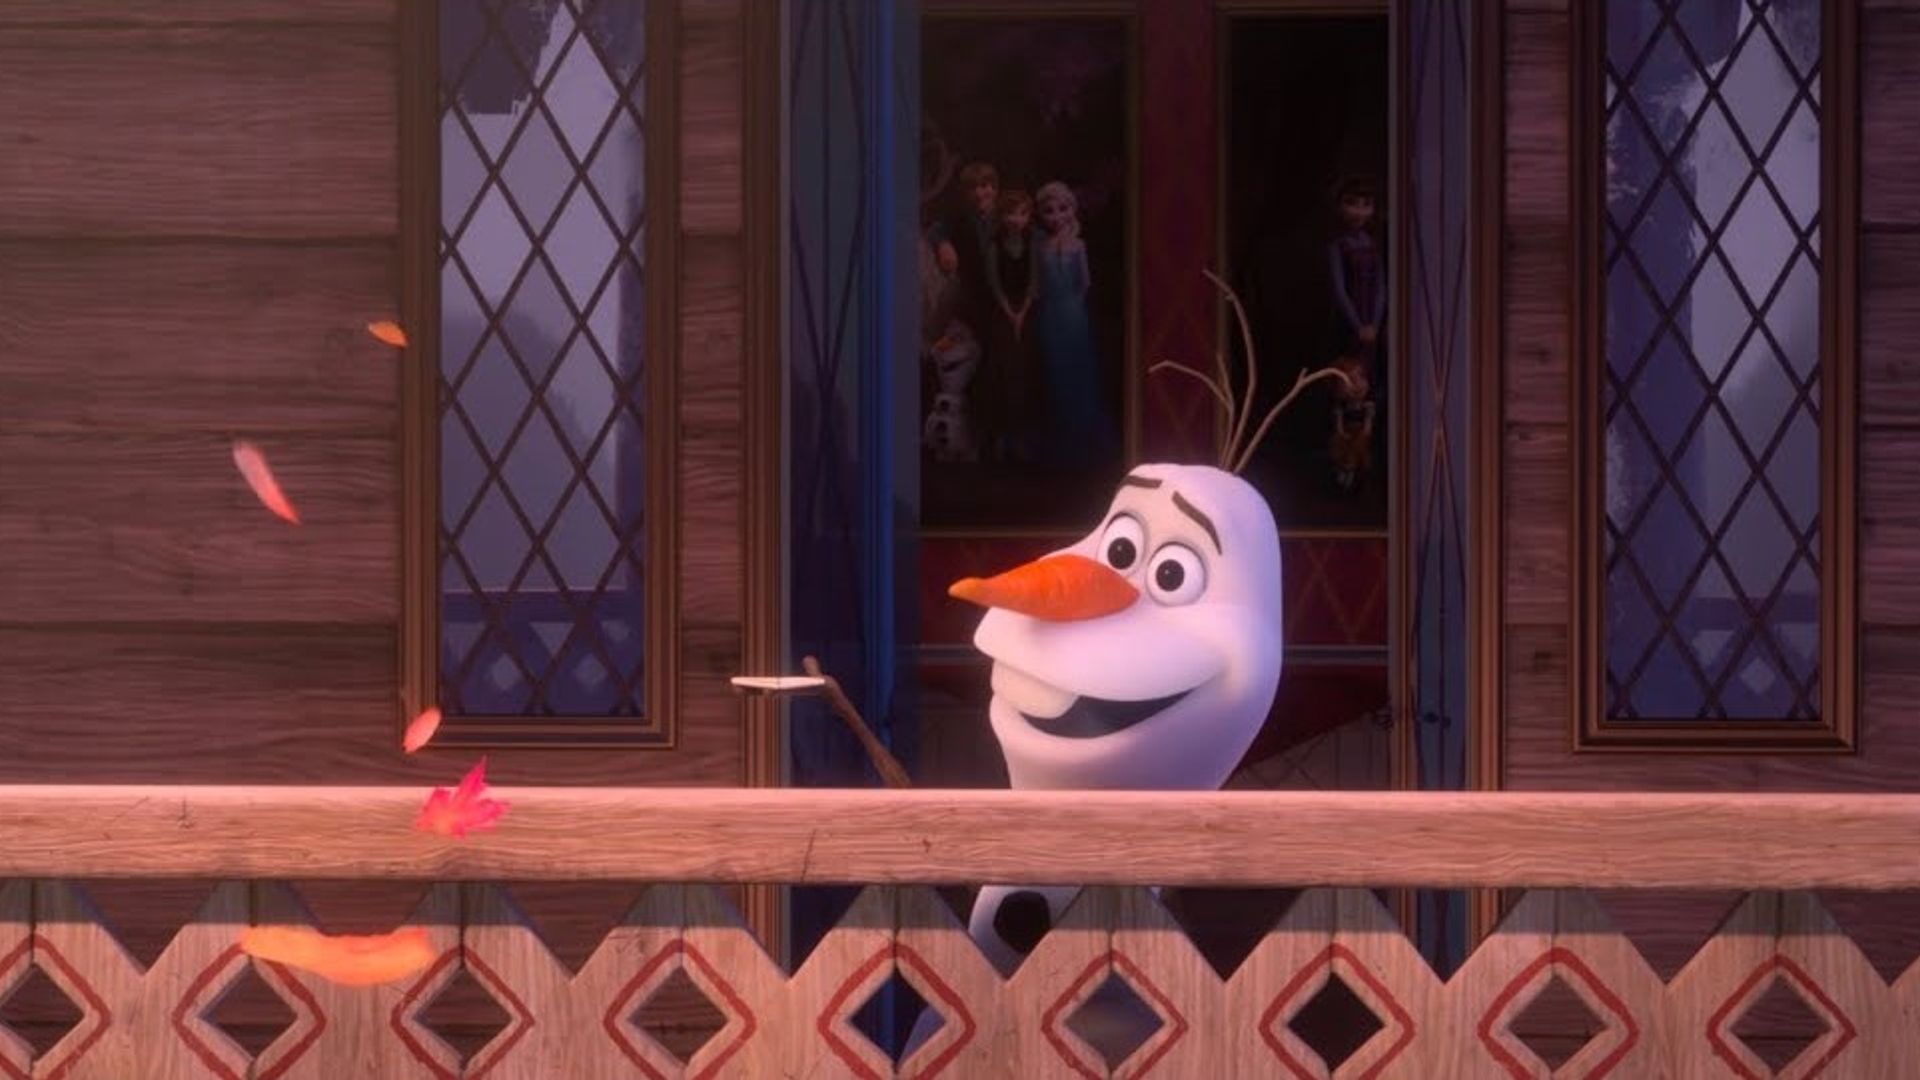 At Home with Olaf background